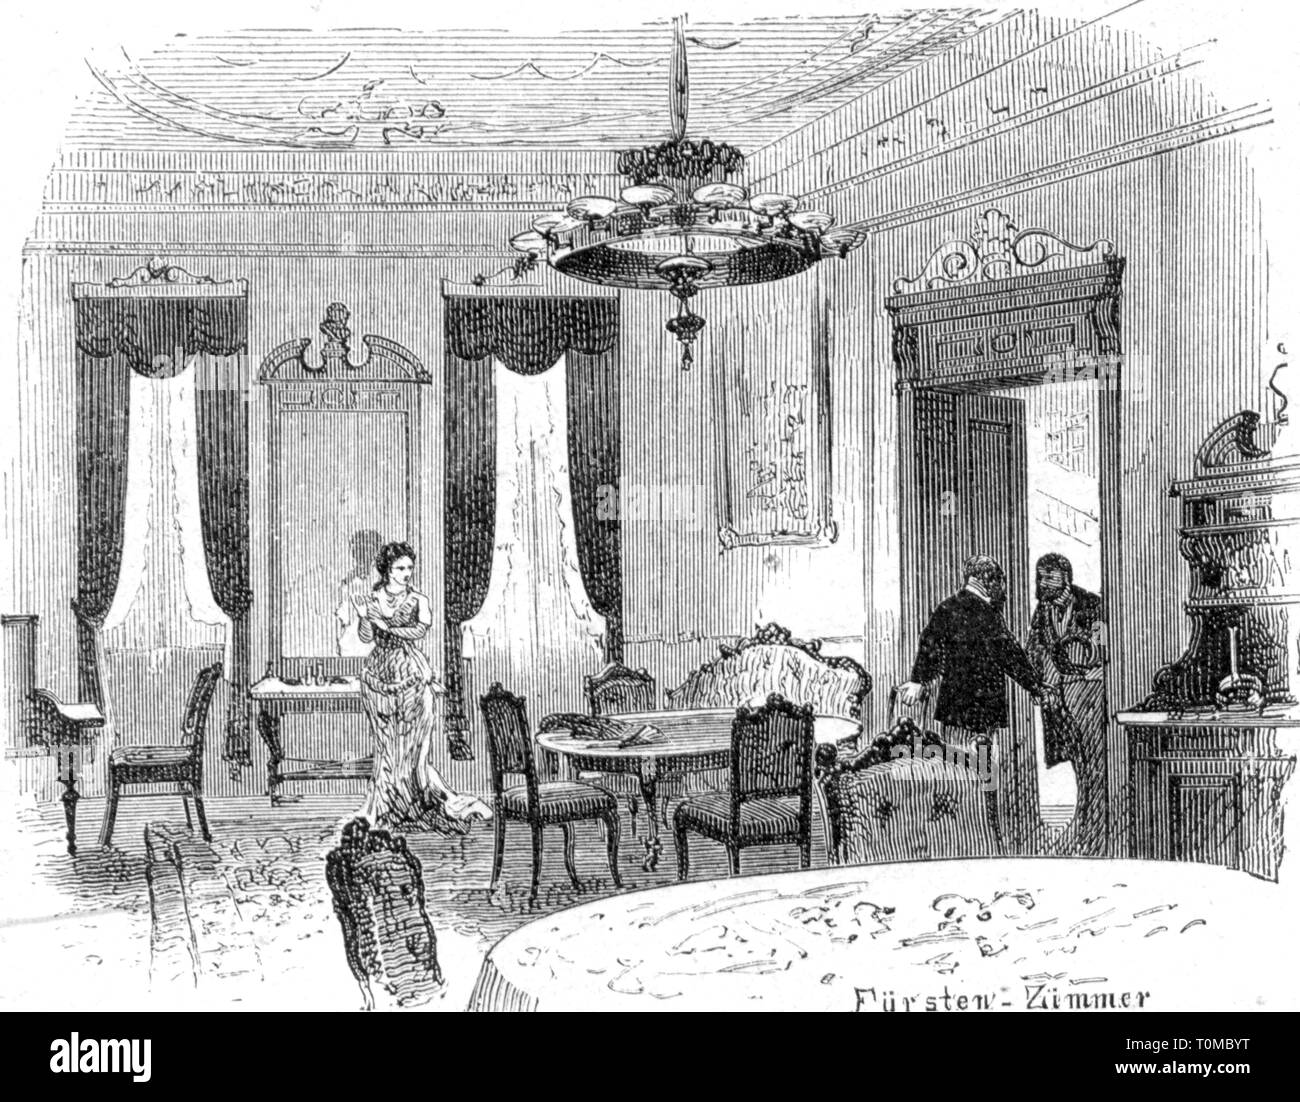 gastronomy, tavern, inn 'Zu den Drei Mohren', Augsburg, interior view, prince's room, wood engraving after drawing by G. Sundblad, 'Die Gartenlaube', 1878, Additional-Rights-Clearance-Info-Not-Available Stock Photo